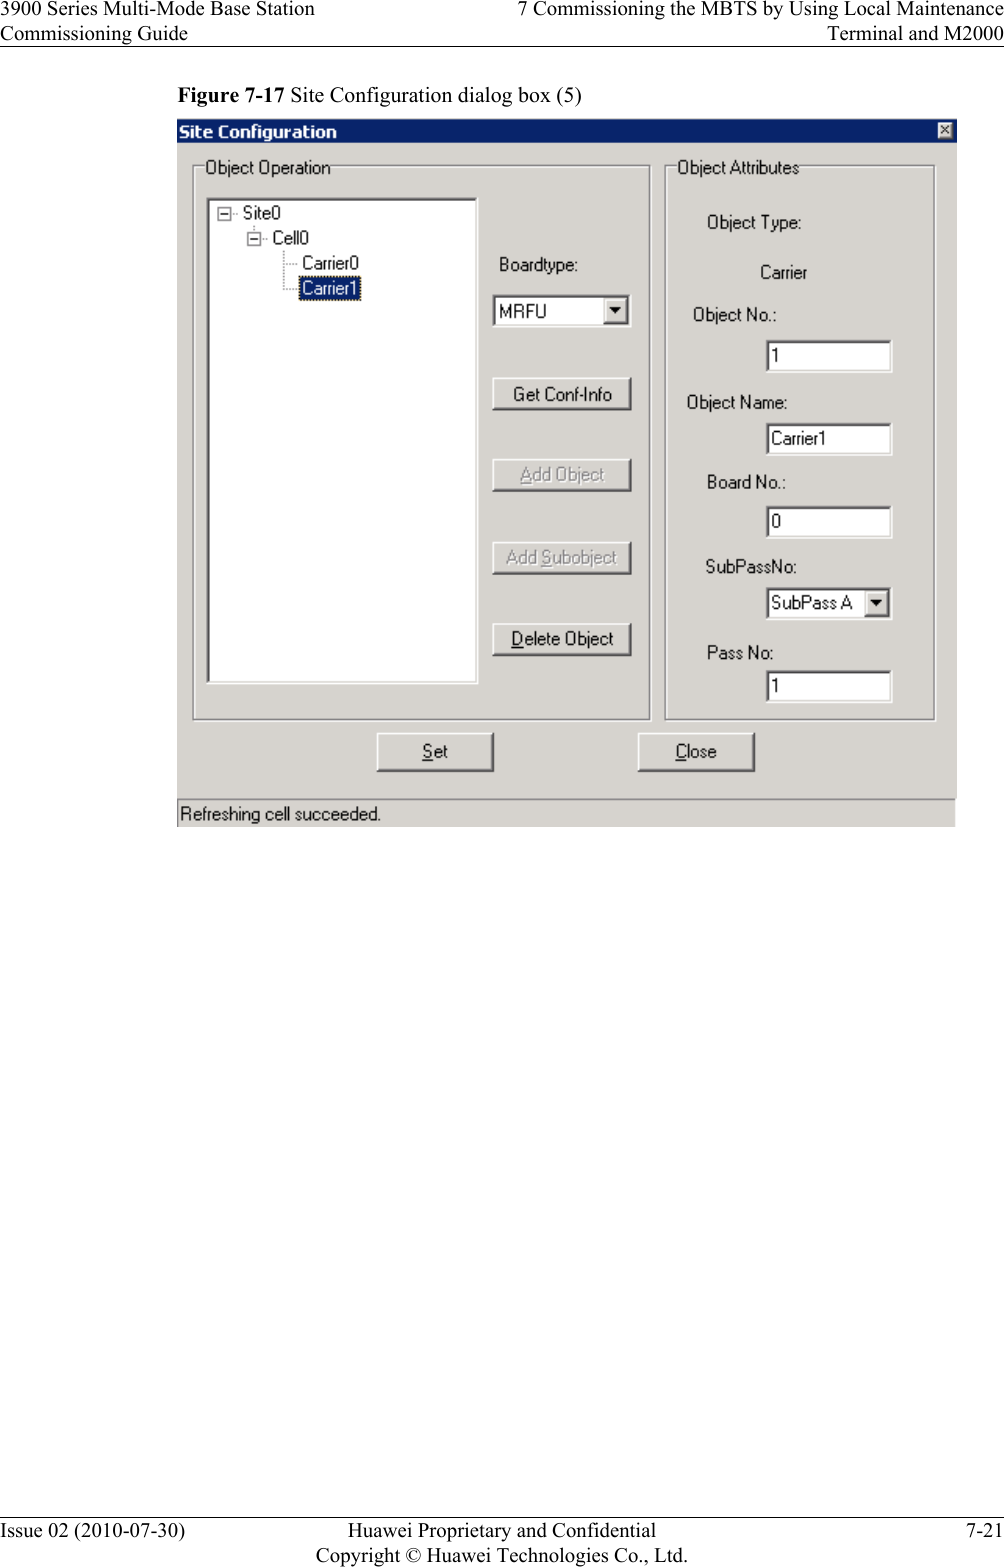 Figure 7-17 Site Configuration dialog box (5) 3900 Series Multi-Mode Base StationCommissioning Guide7 Commissioning the MBTS by Using Local MaintenanceTerminal and M2000Issue 02 (2010-07-30) Huawei Proprietary and ConfidentialCopyright © Huawei Technologies Co., Ltd.7-21